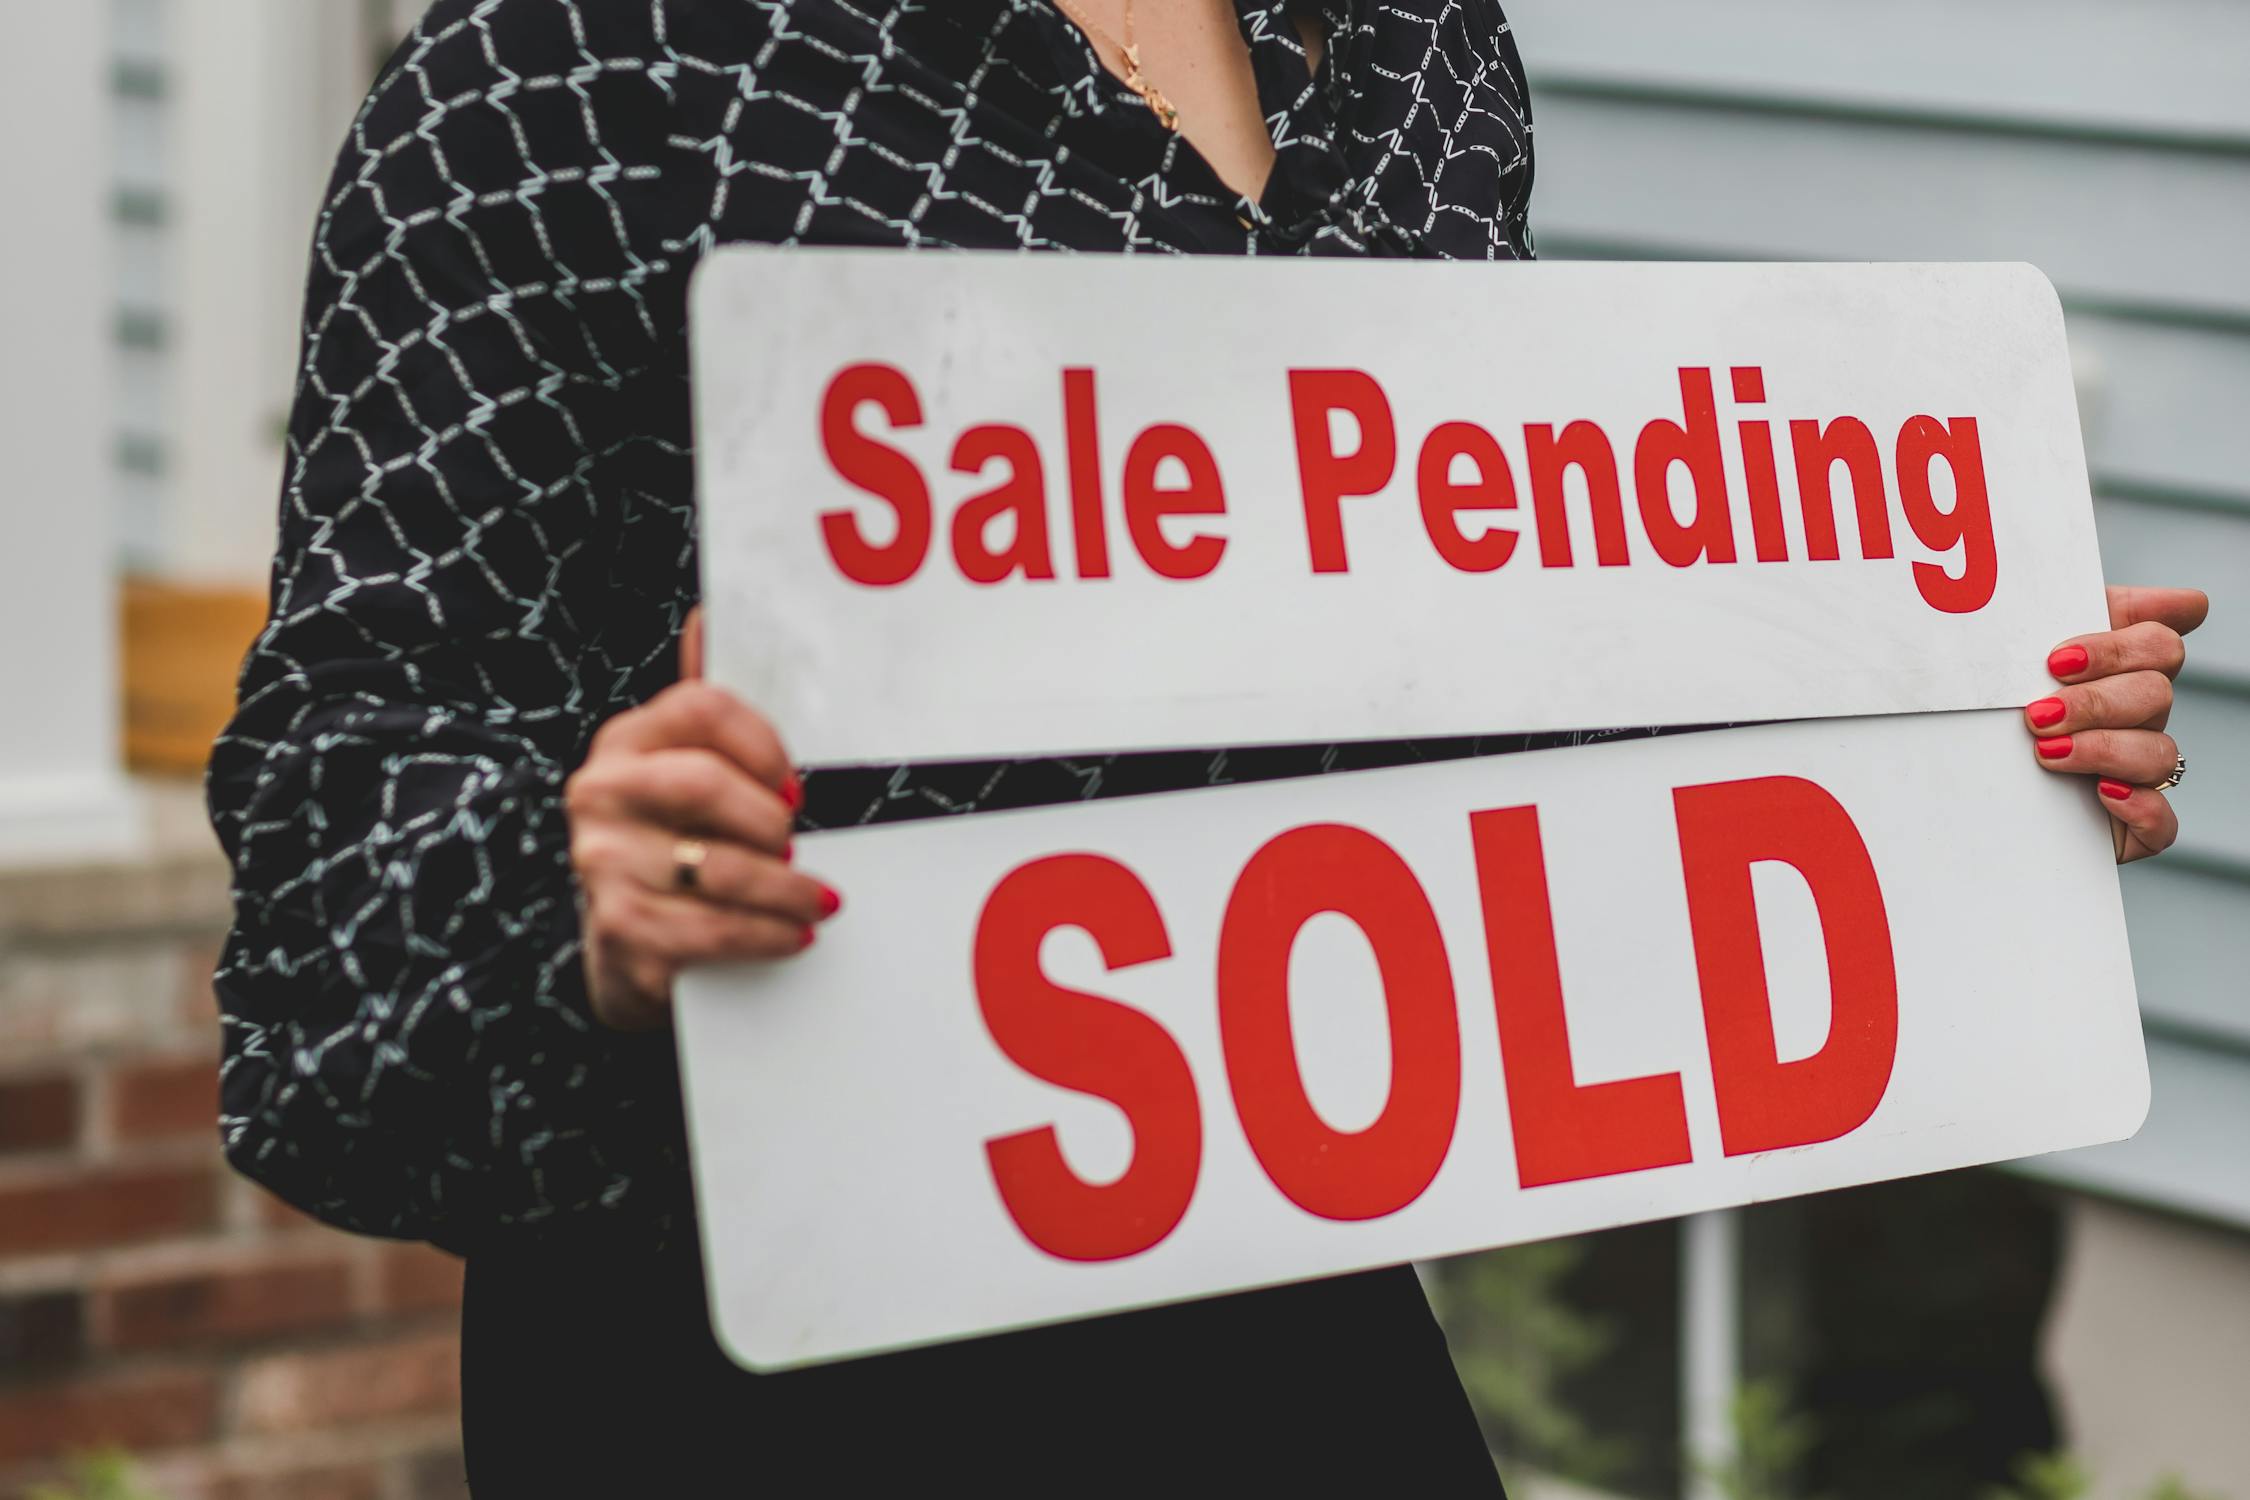 A person holding signs saying “Sale Pending” and “Sold”